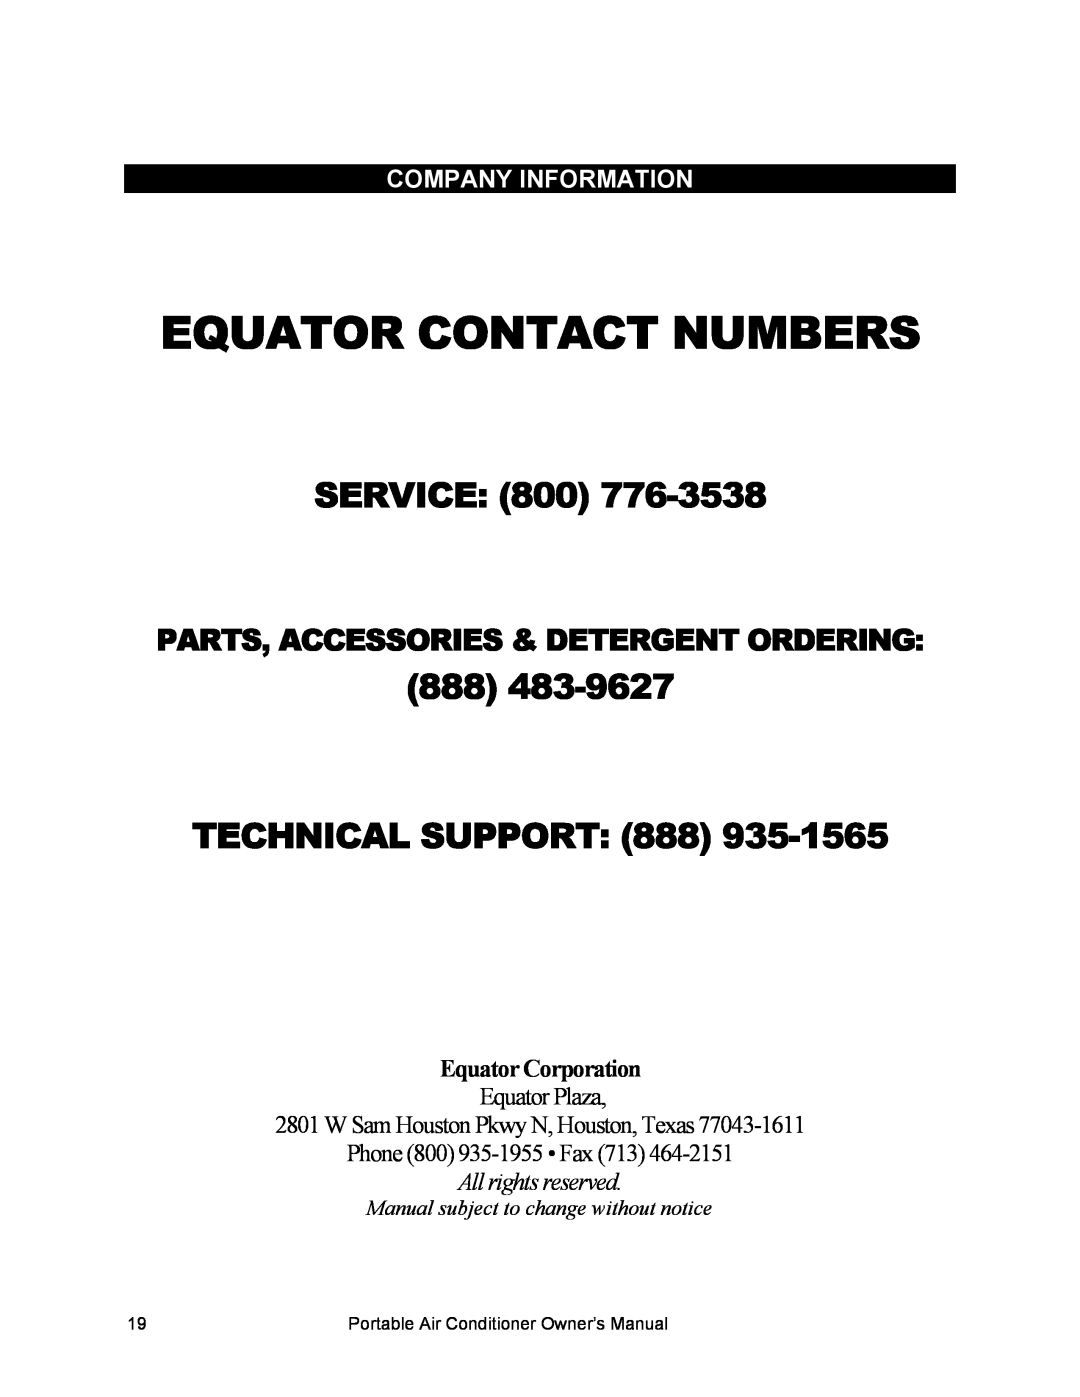 Equator PAC 10, PAC 8, PAC 12 Equator Contact Numbers, Company Information, Service, Technical Support, Equator Corporation 